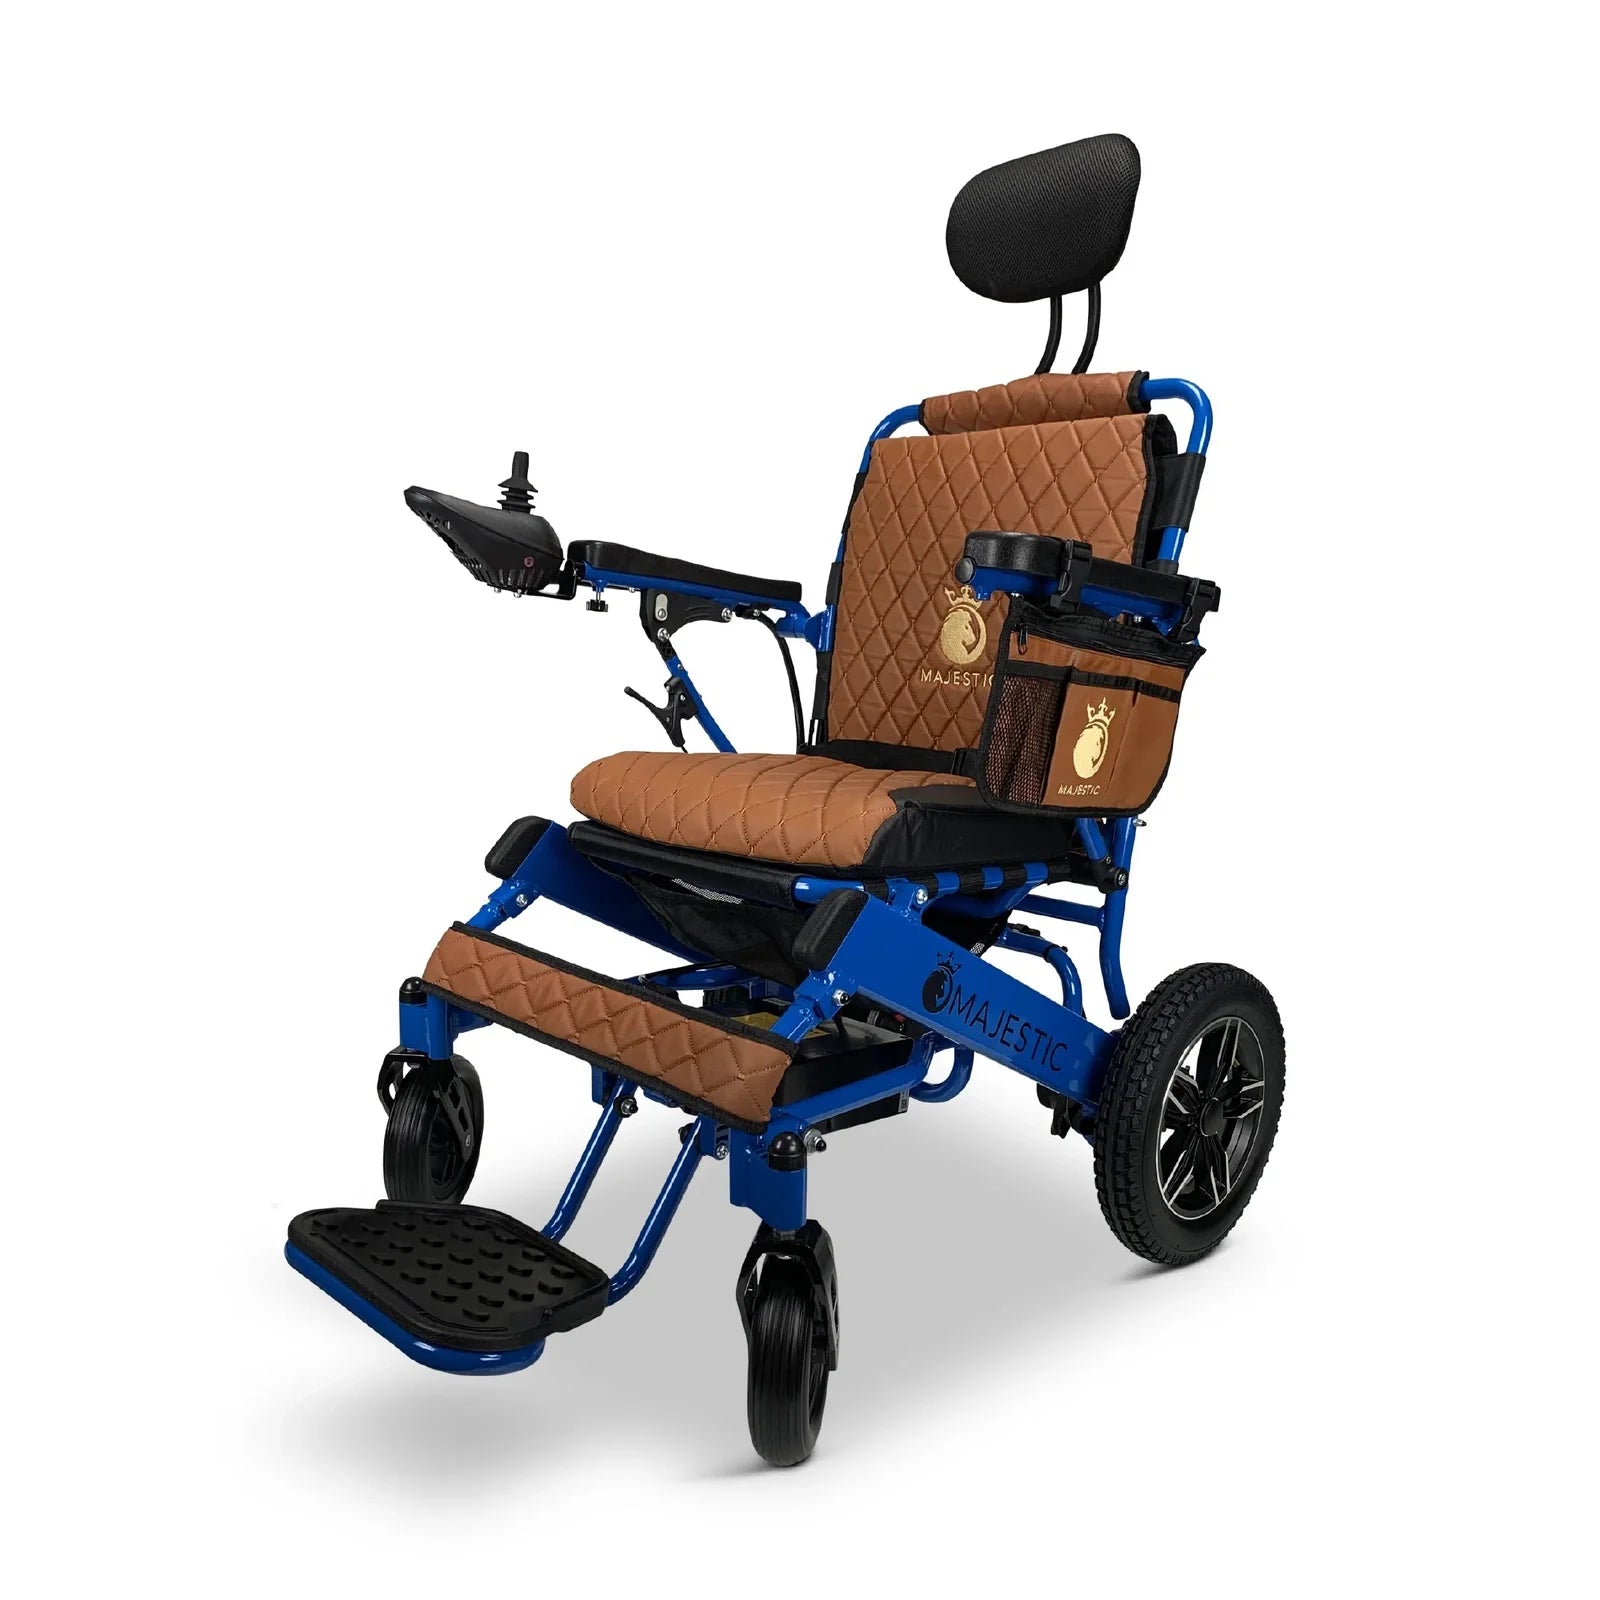 ComfyGO Majestic IQ-8000 Remote Controlled Lightweight Folding Electric Wheelchair Power Wheelchairs ComfyGO Blue Taba 10 Miles & 17.5" Seat Width